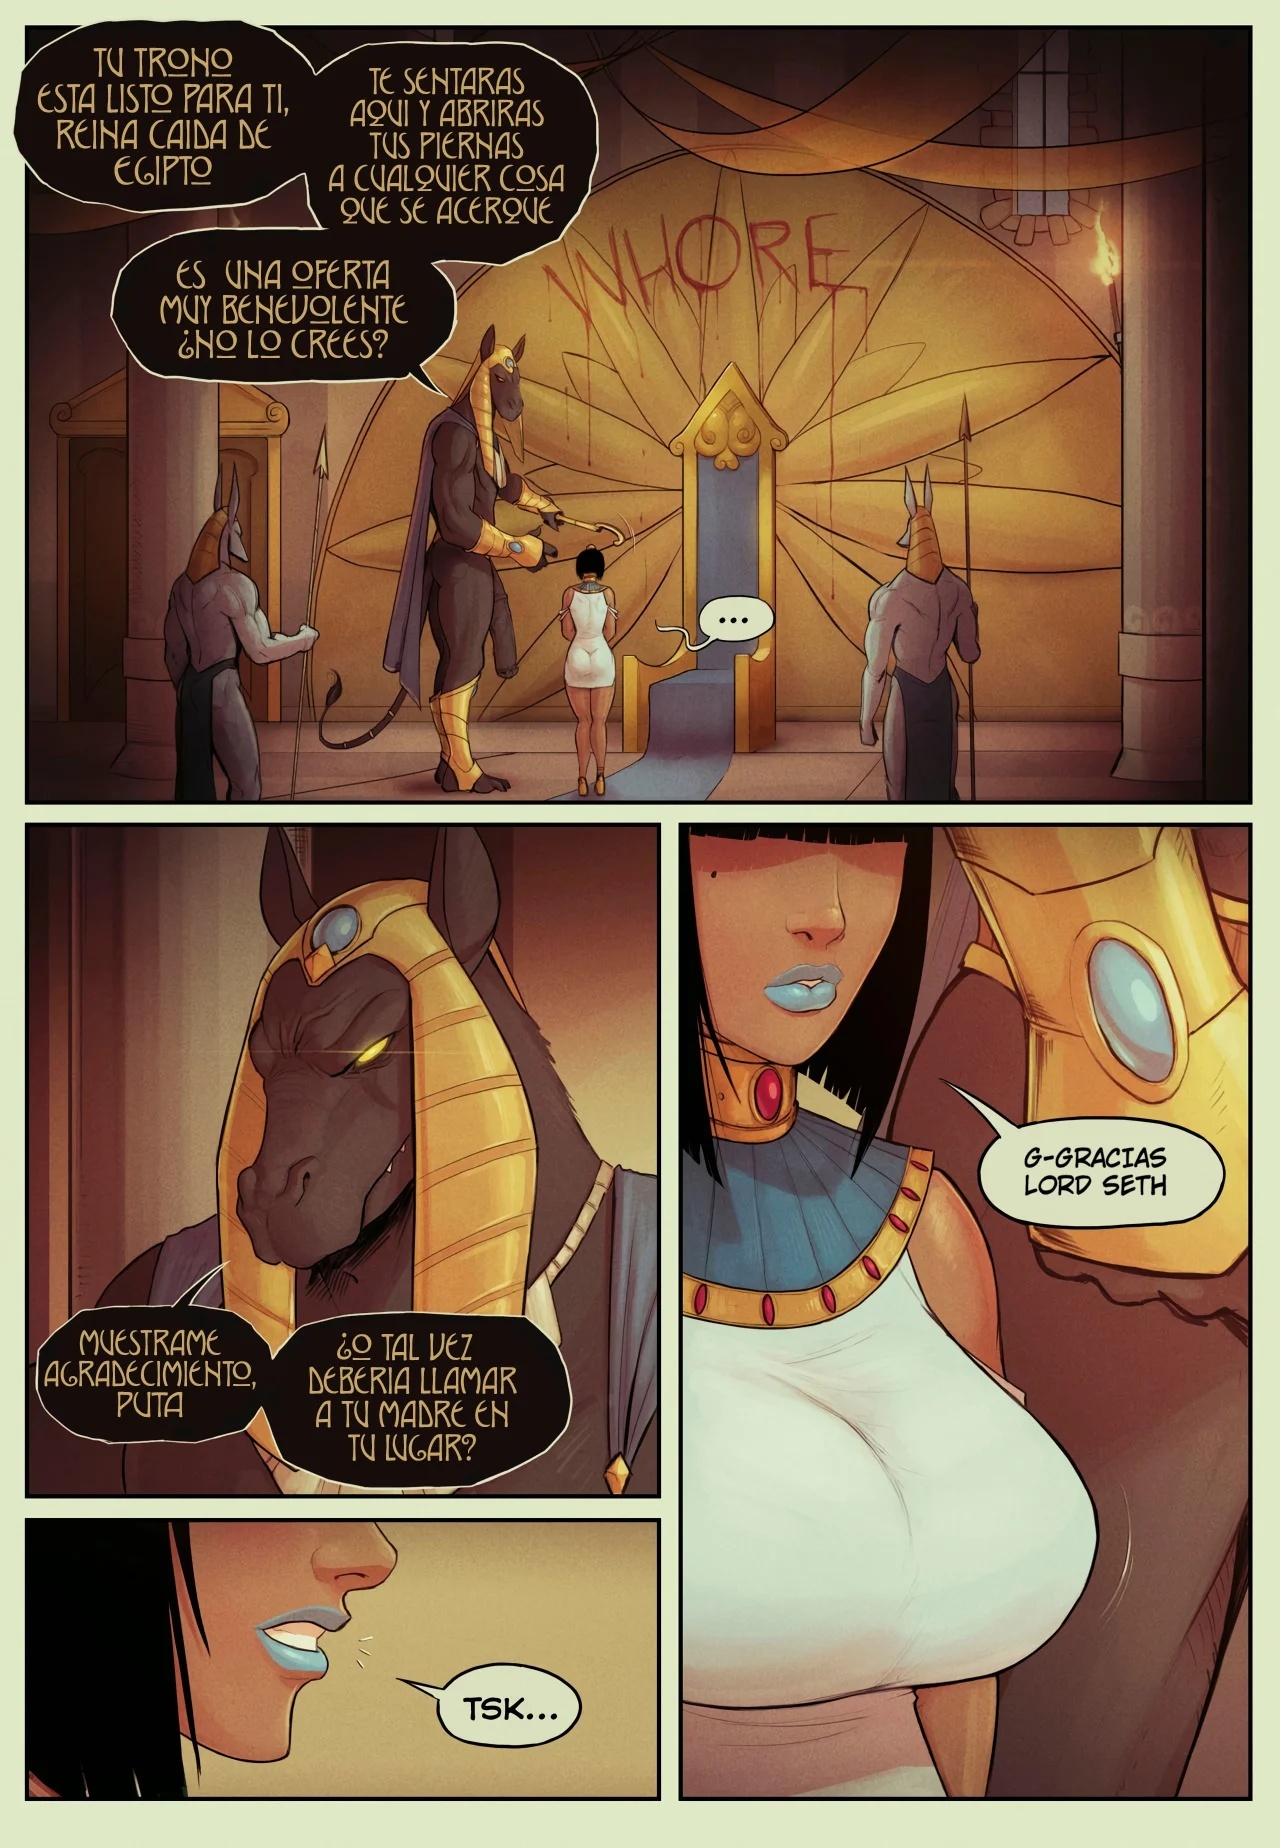 3 - Legend of Queen Opala -Tales of Opala IN THE SHADOW OF ANUBIS III PART I - 9